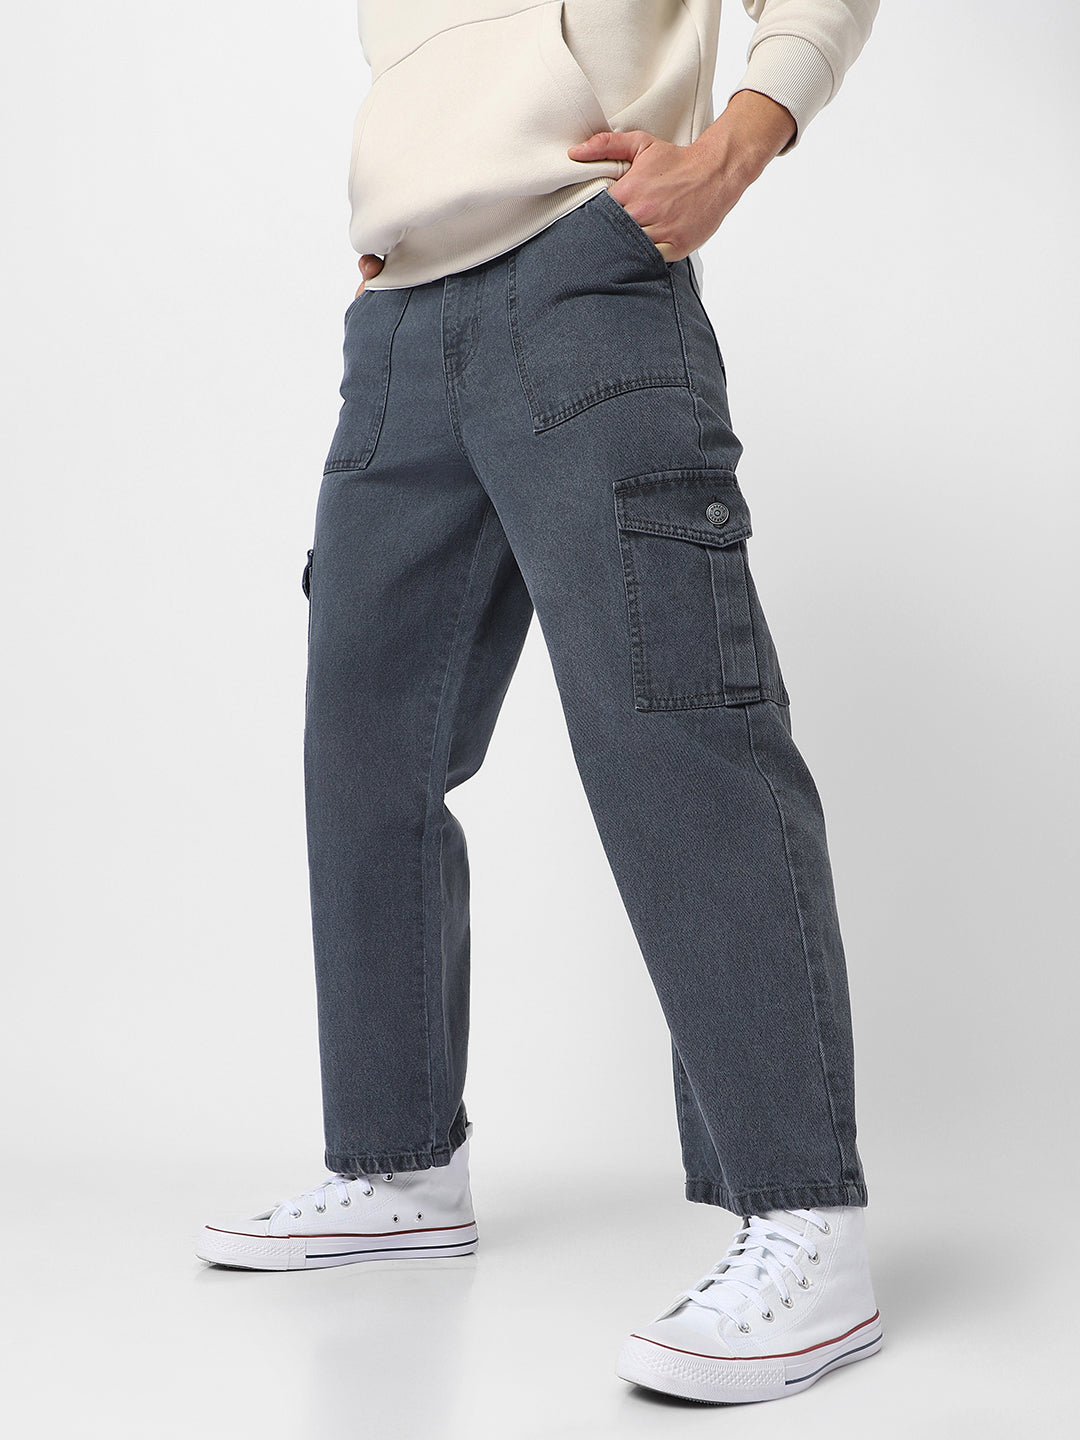 Trendy and stylish men's jeans with modern fabric wash on Craiyon